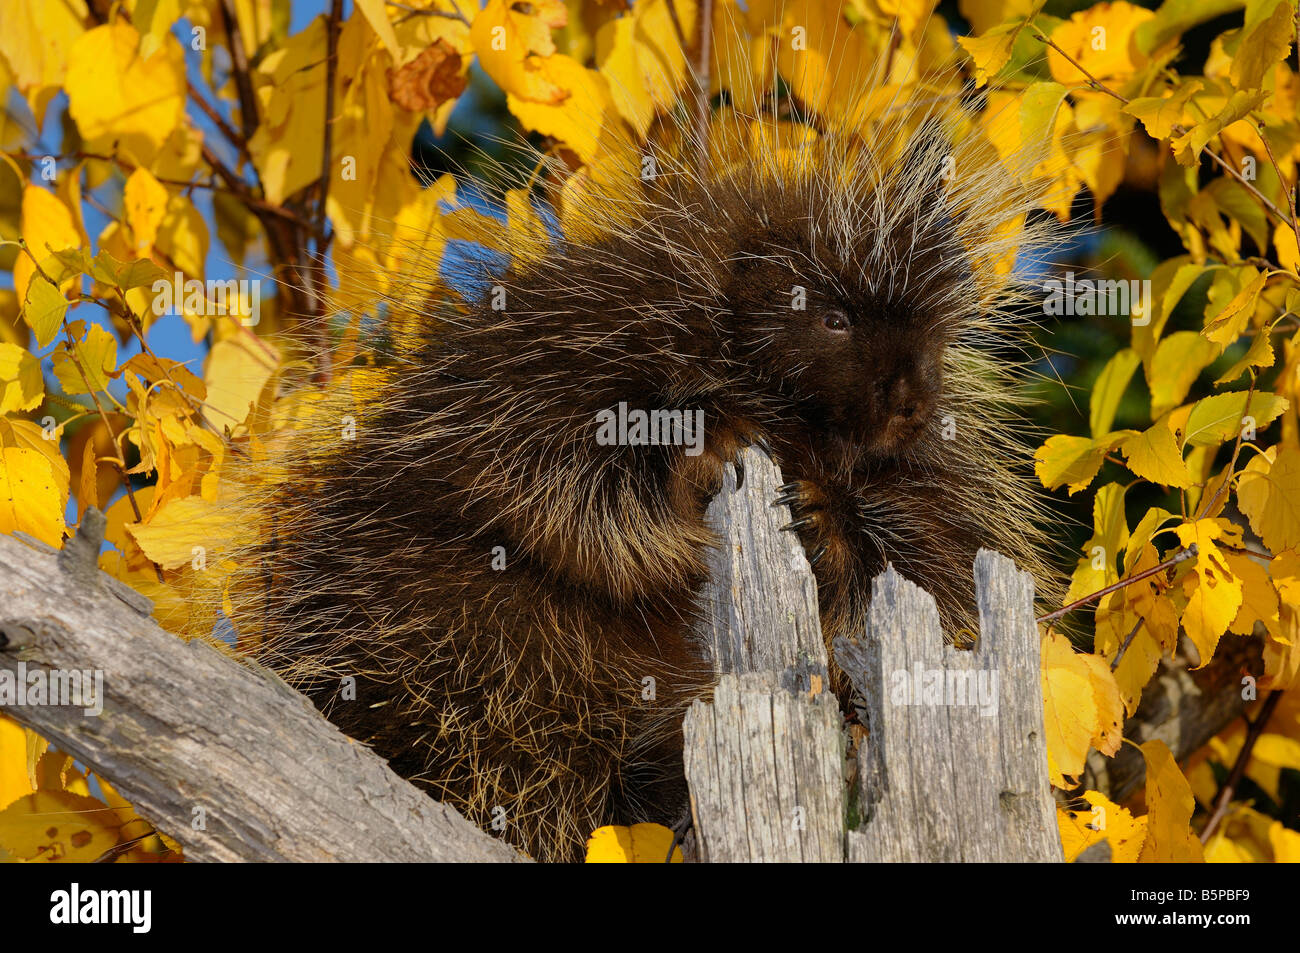 North American Porcupine holding on to a dead tree stump with yellow Birch leaves in the Fall Erethizon Dorsatum Minnesota USA Stock Photo